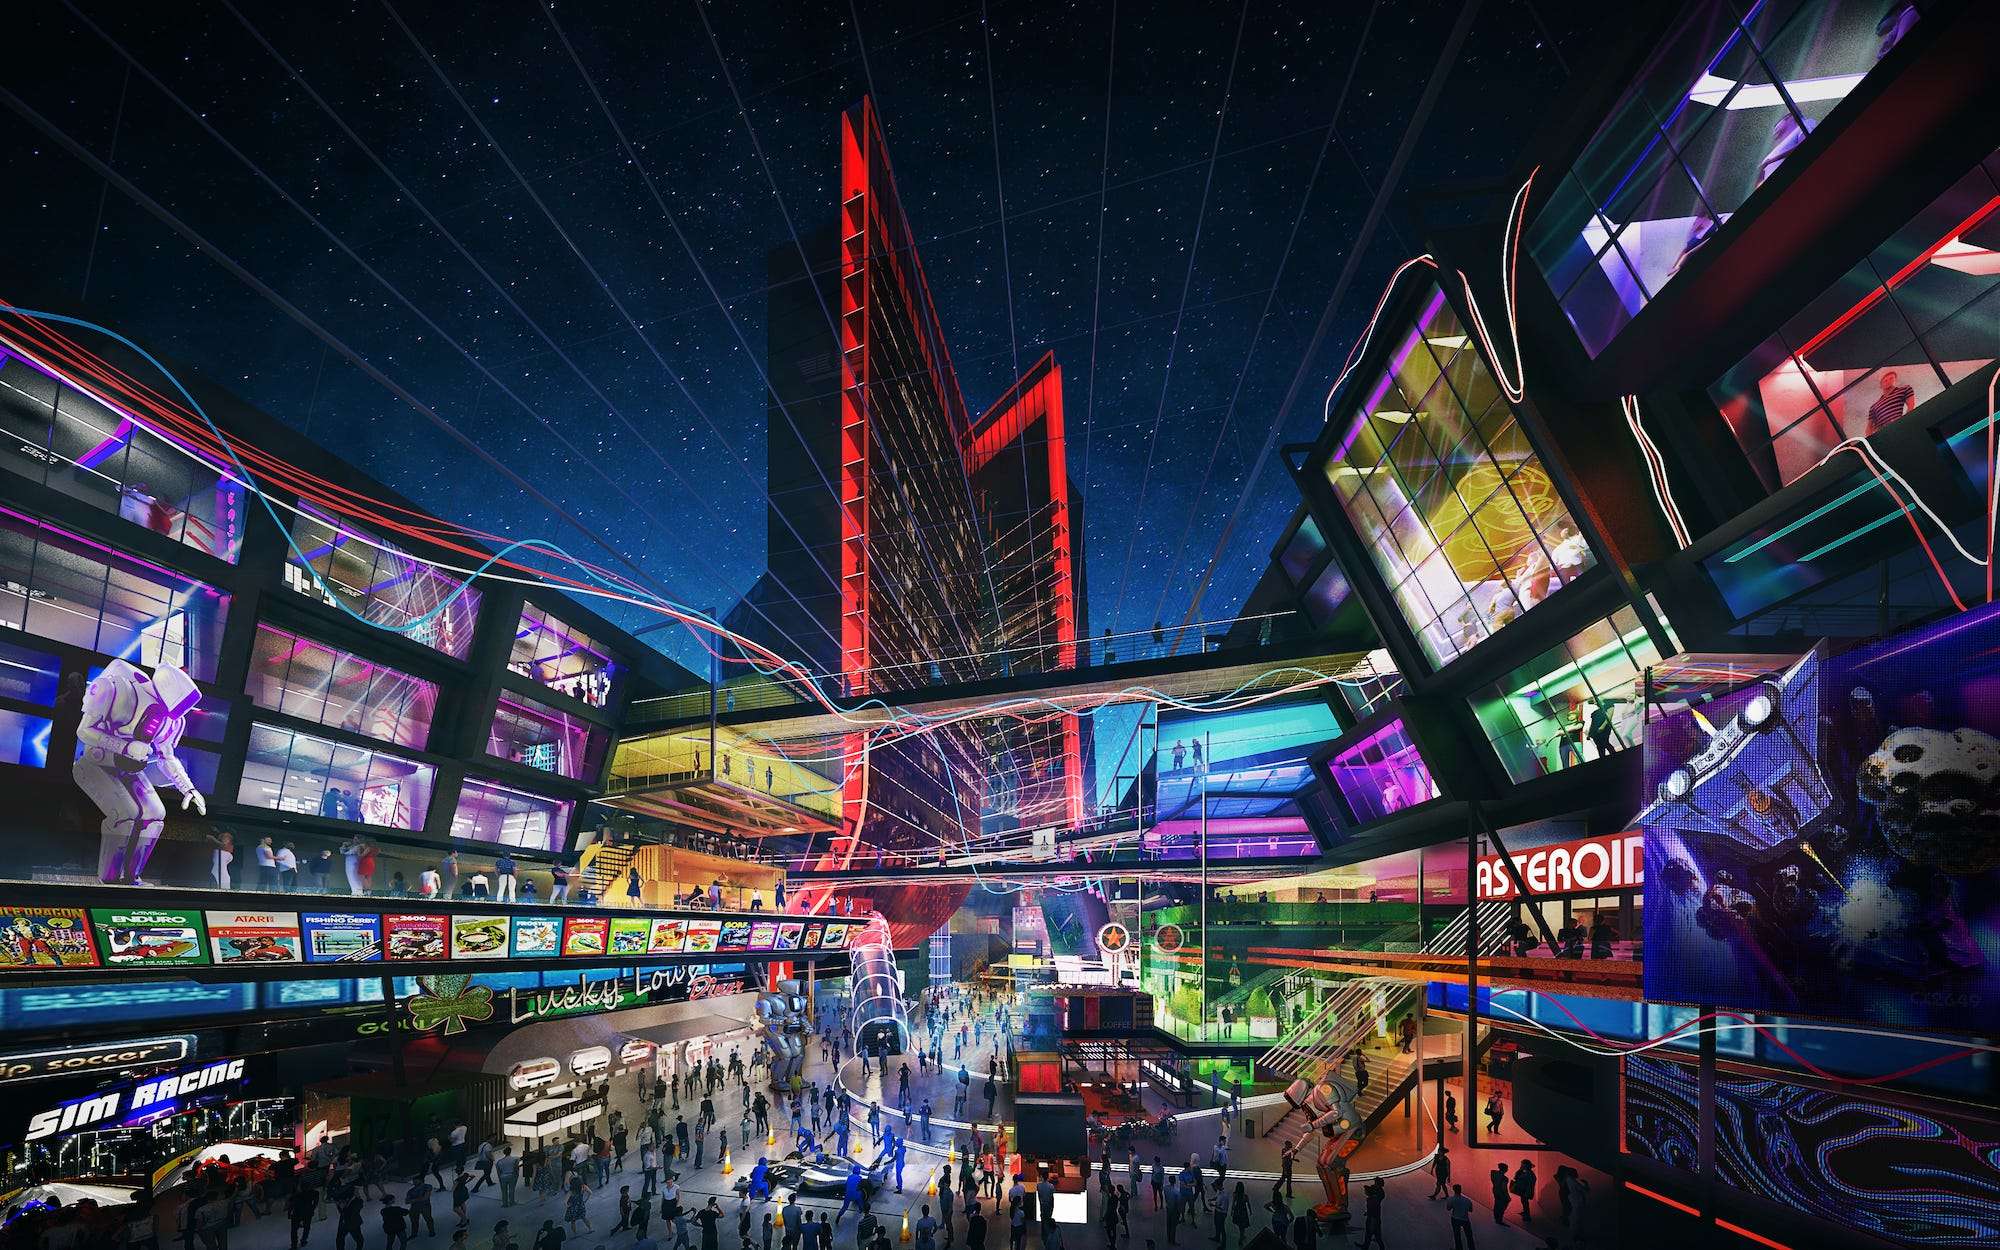 You could soon stay in a video-game themed hotel that features gaming